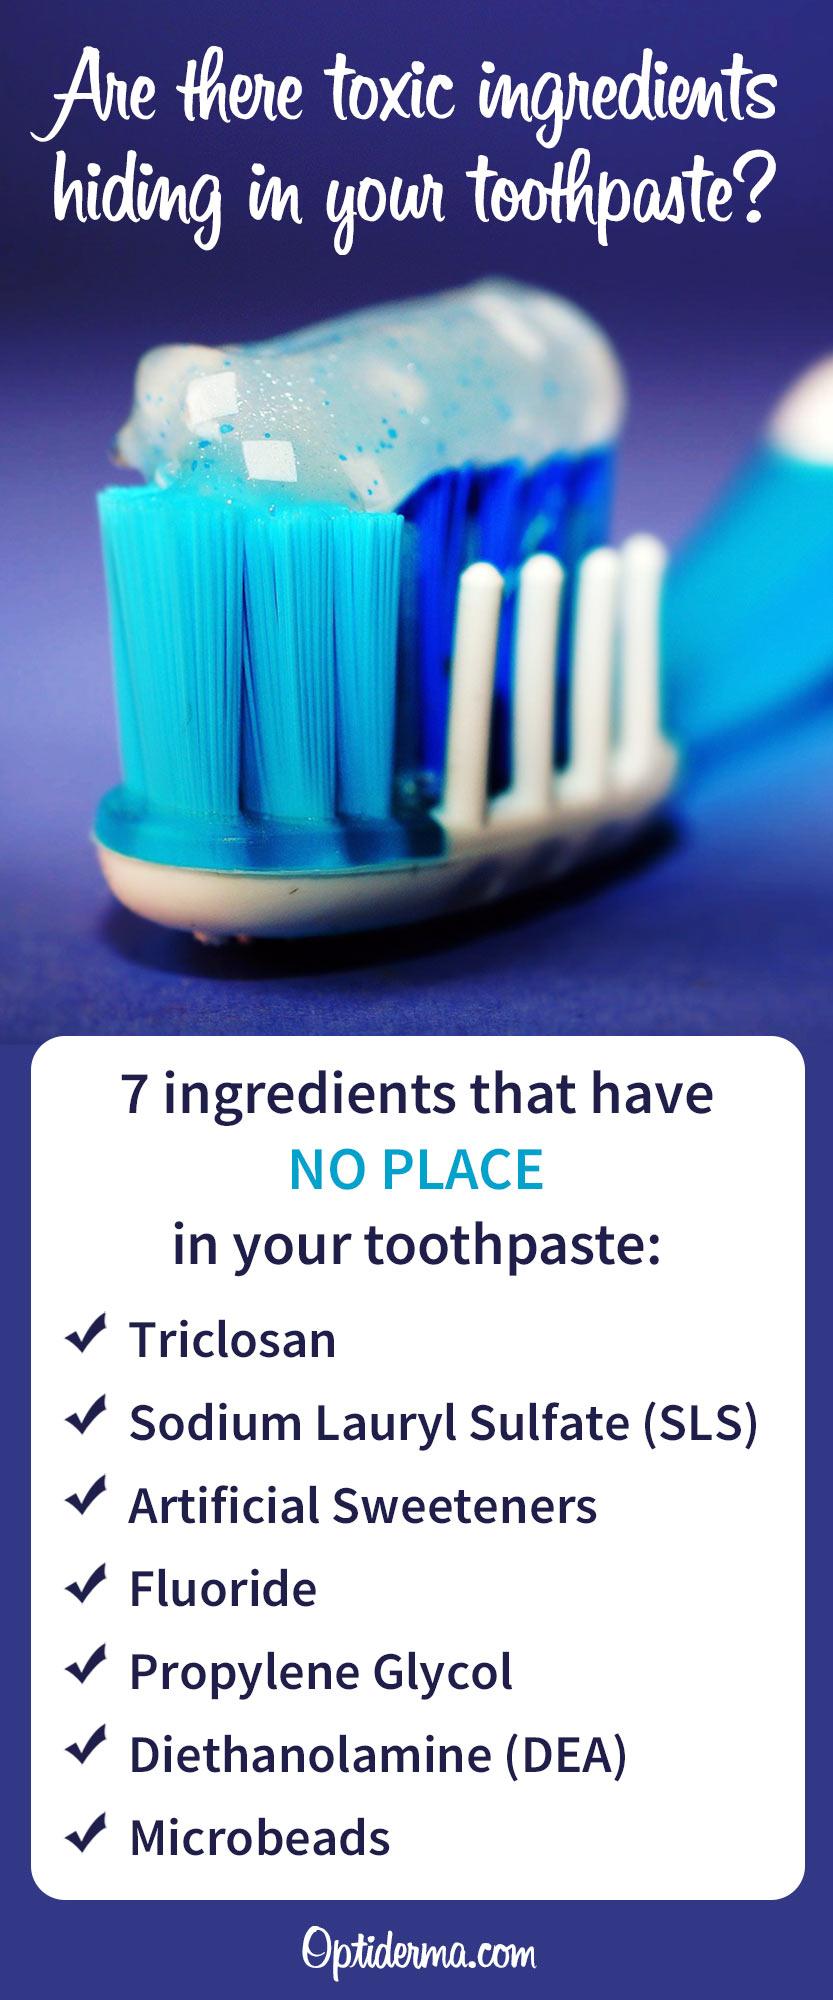 Toxic Ingredients in Toothpaste